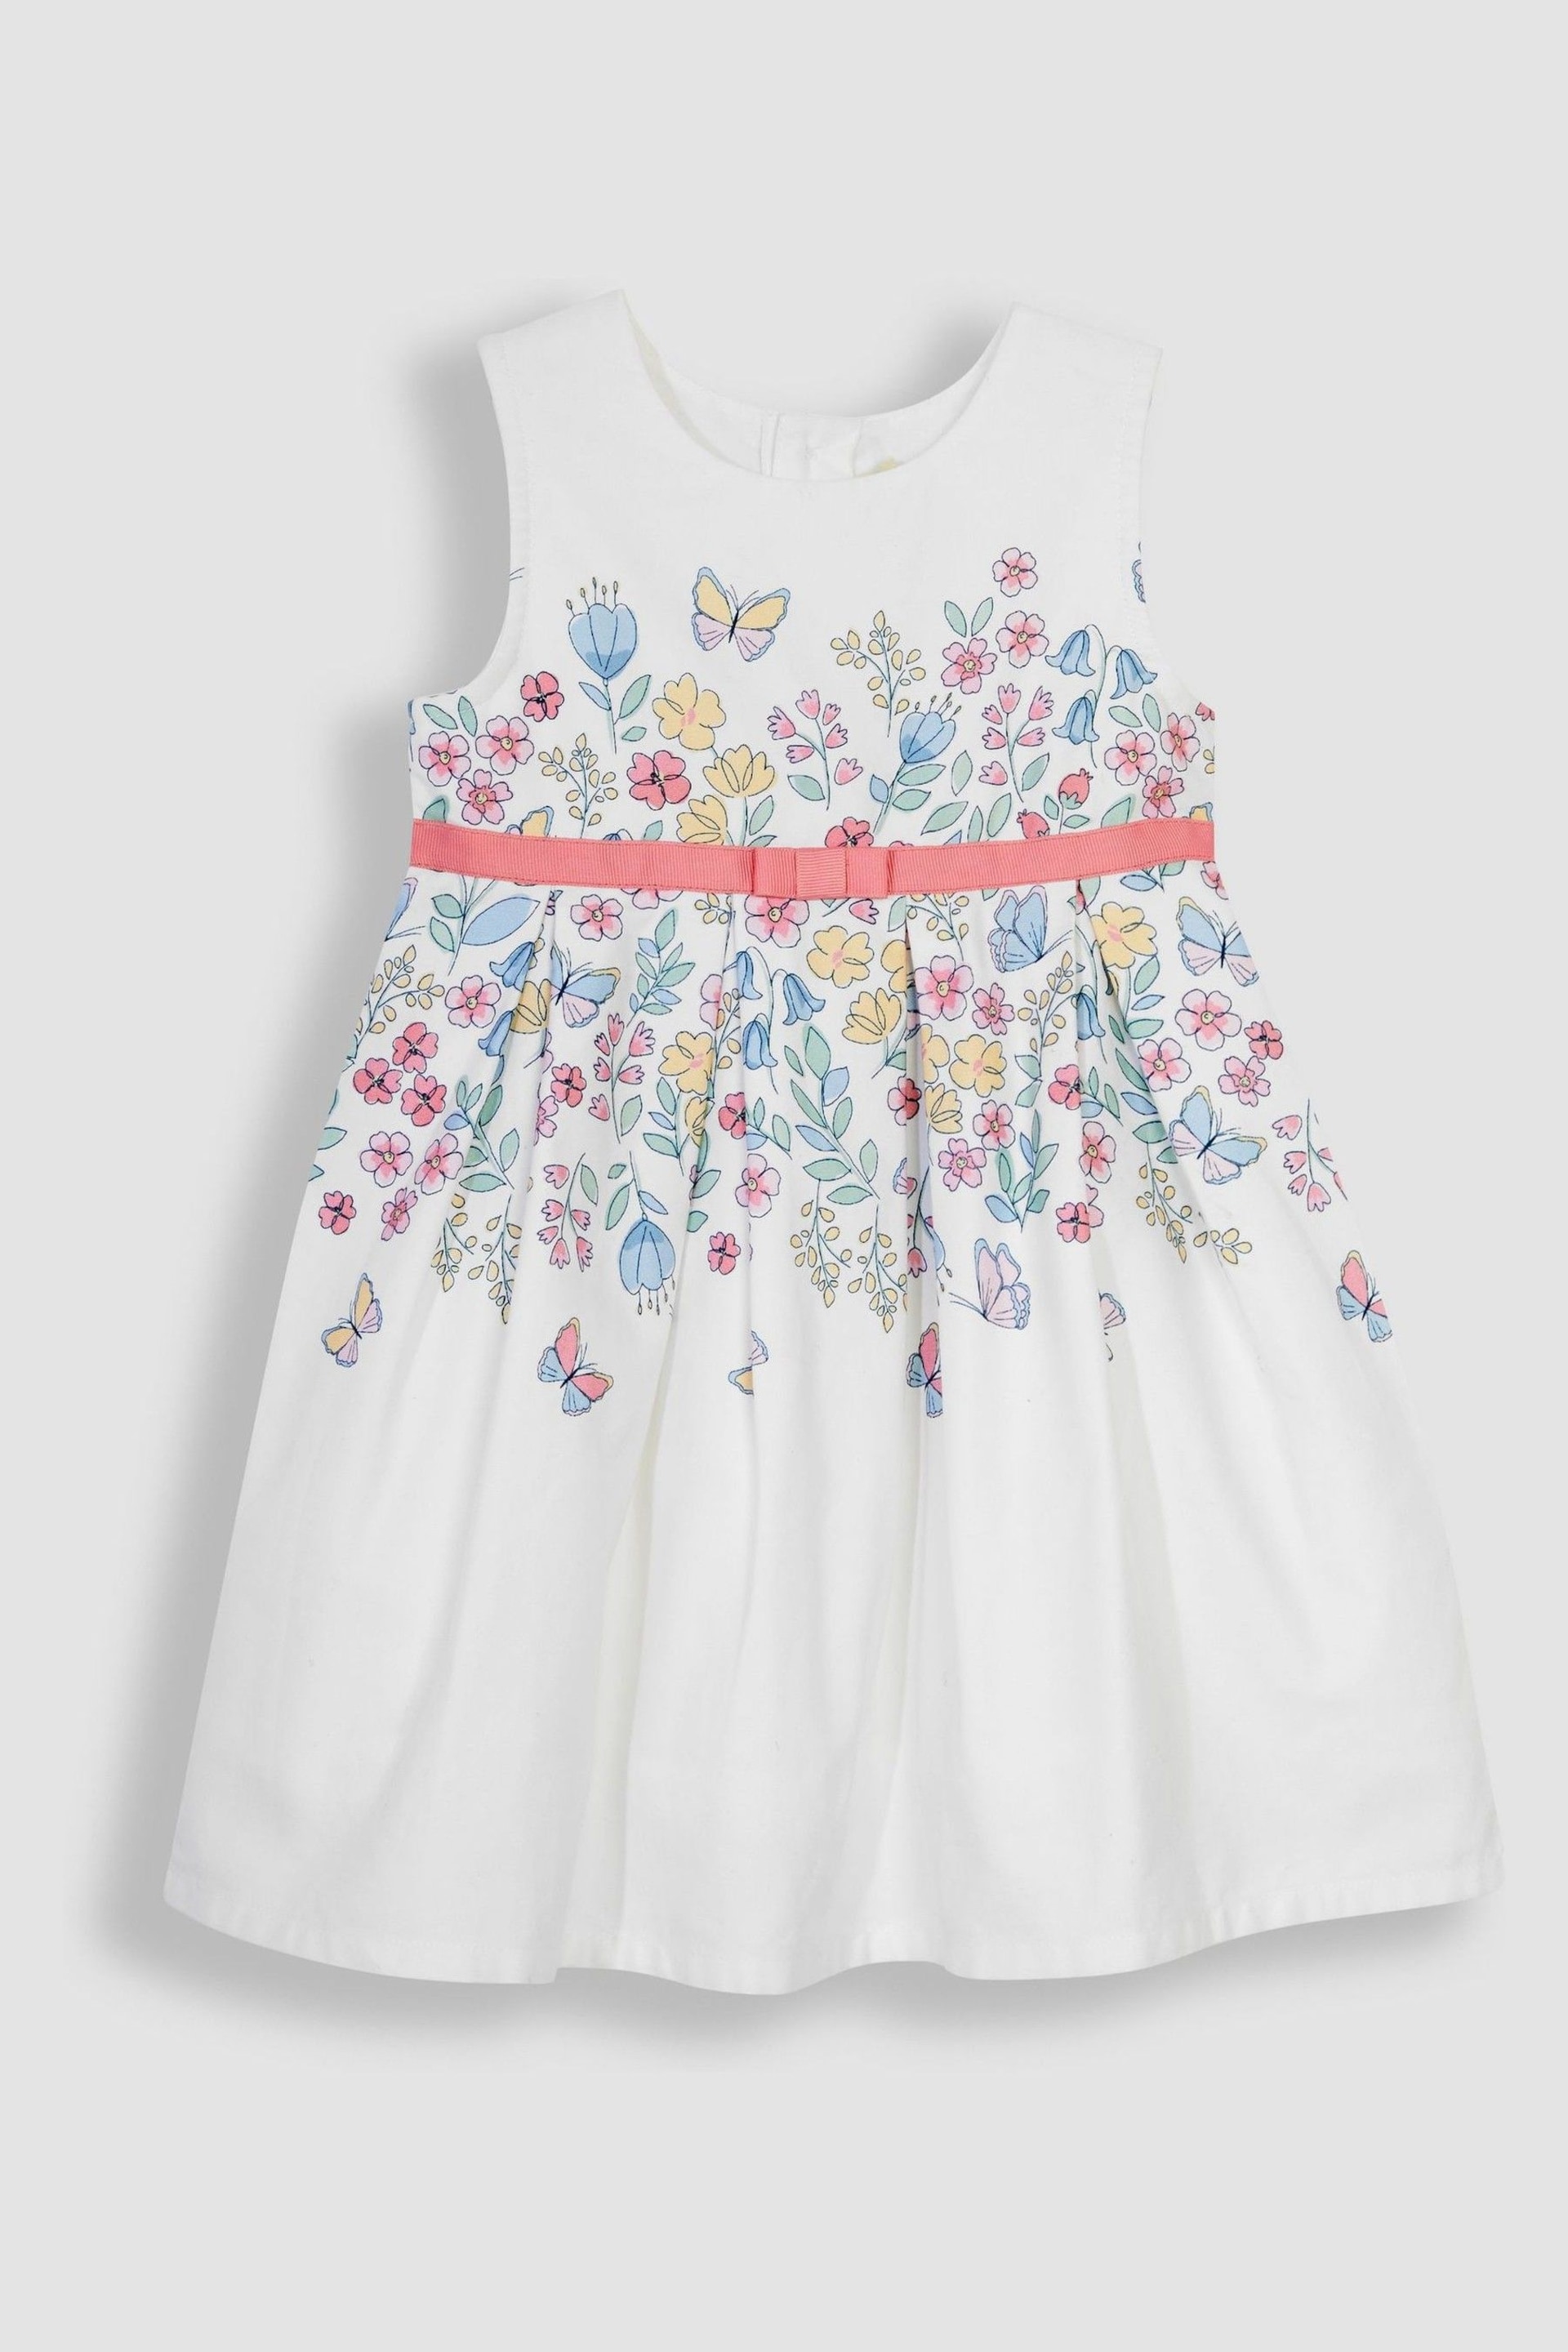 JoJo Maman Bébé White Butterfly Floral Pretty Pleated Party Dress - Image 1 of 3